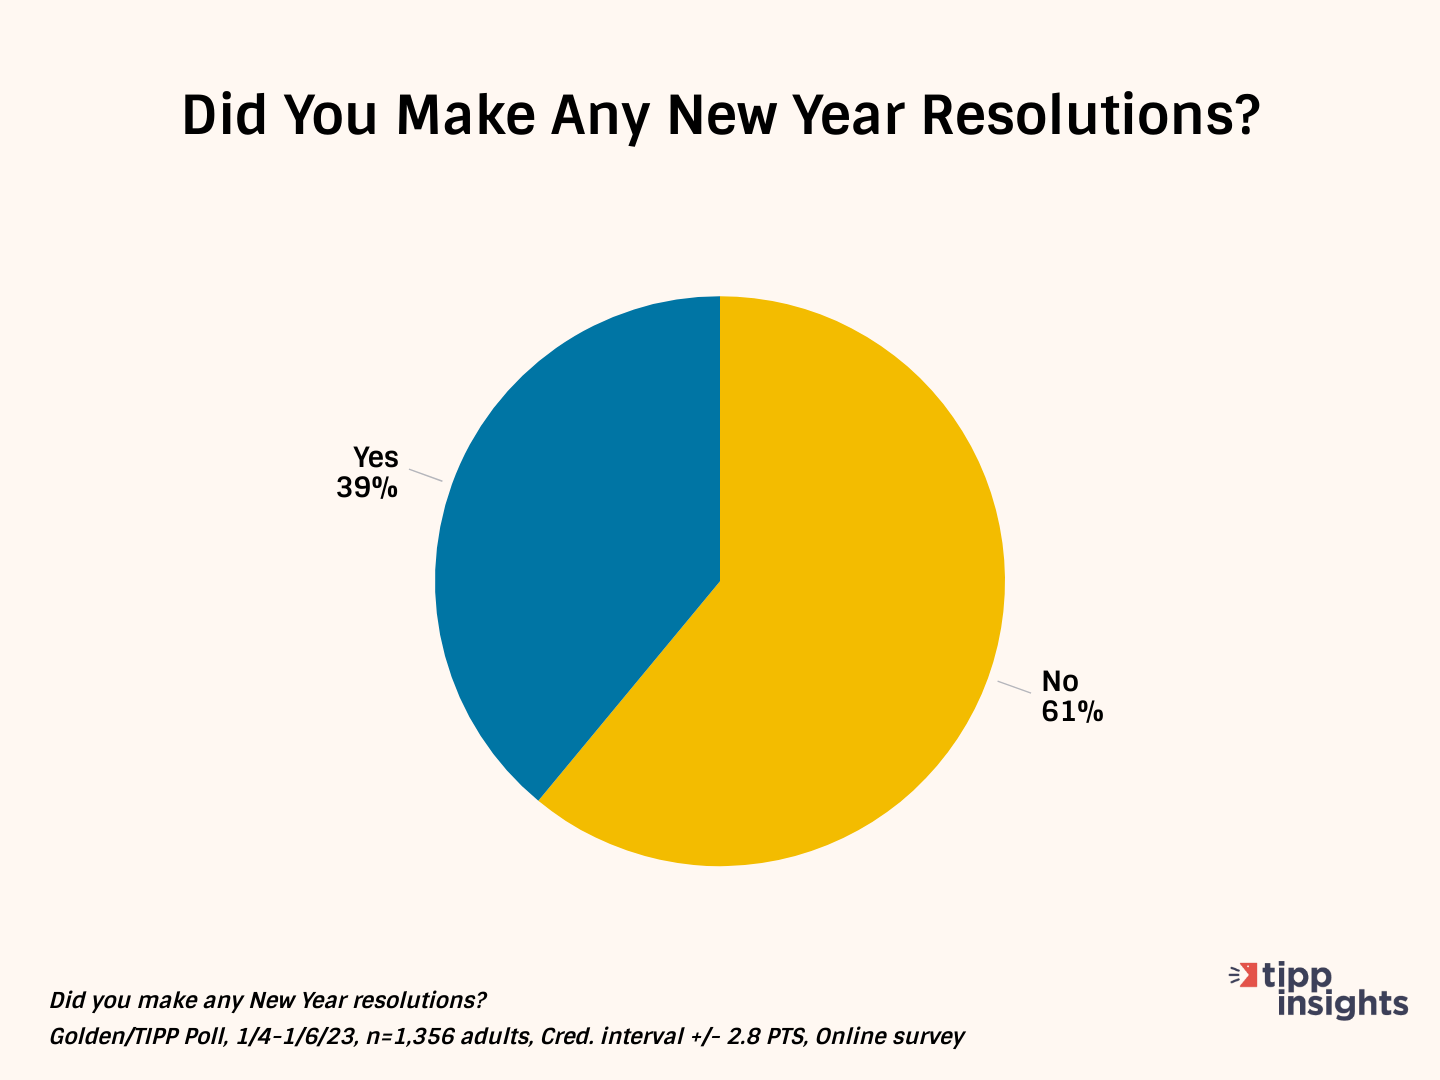 New Year Resolutions Losing Appeal For Americans